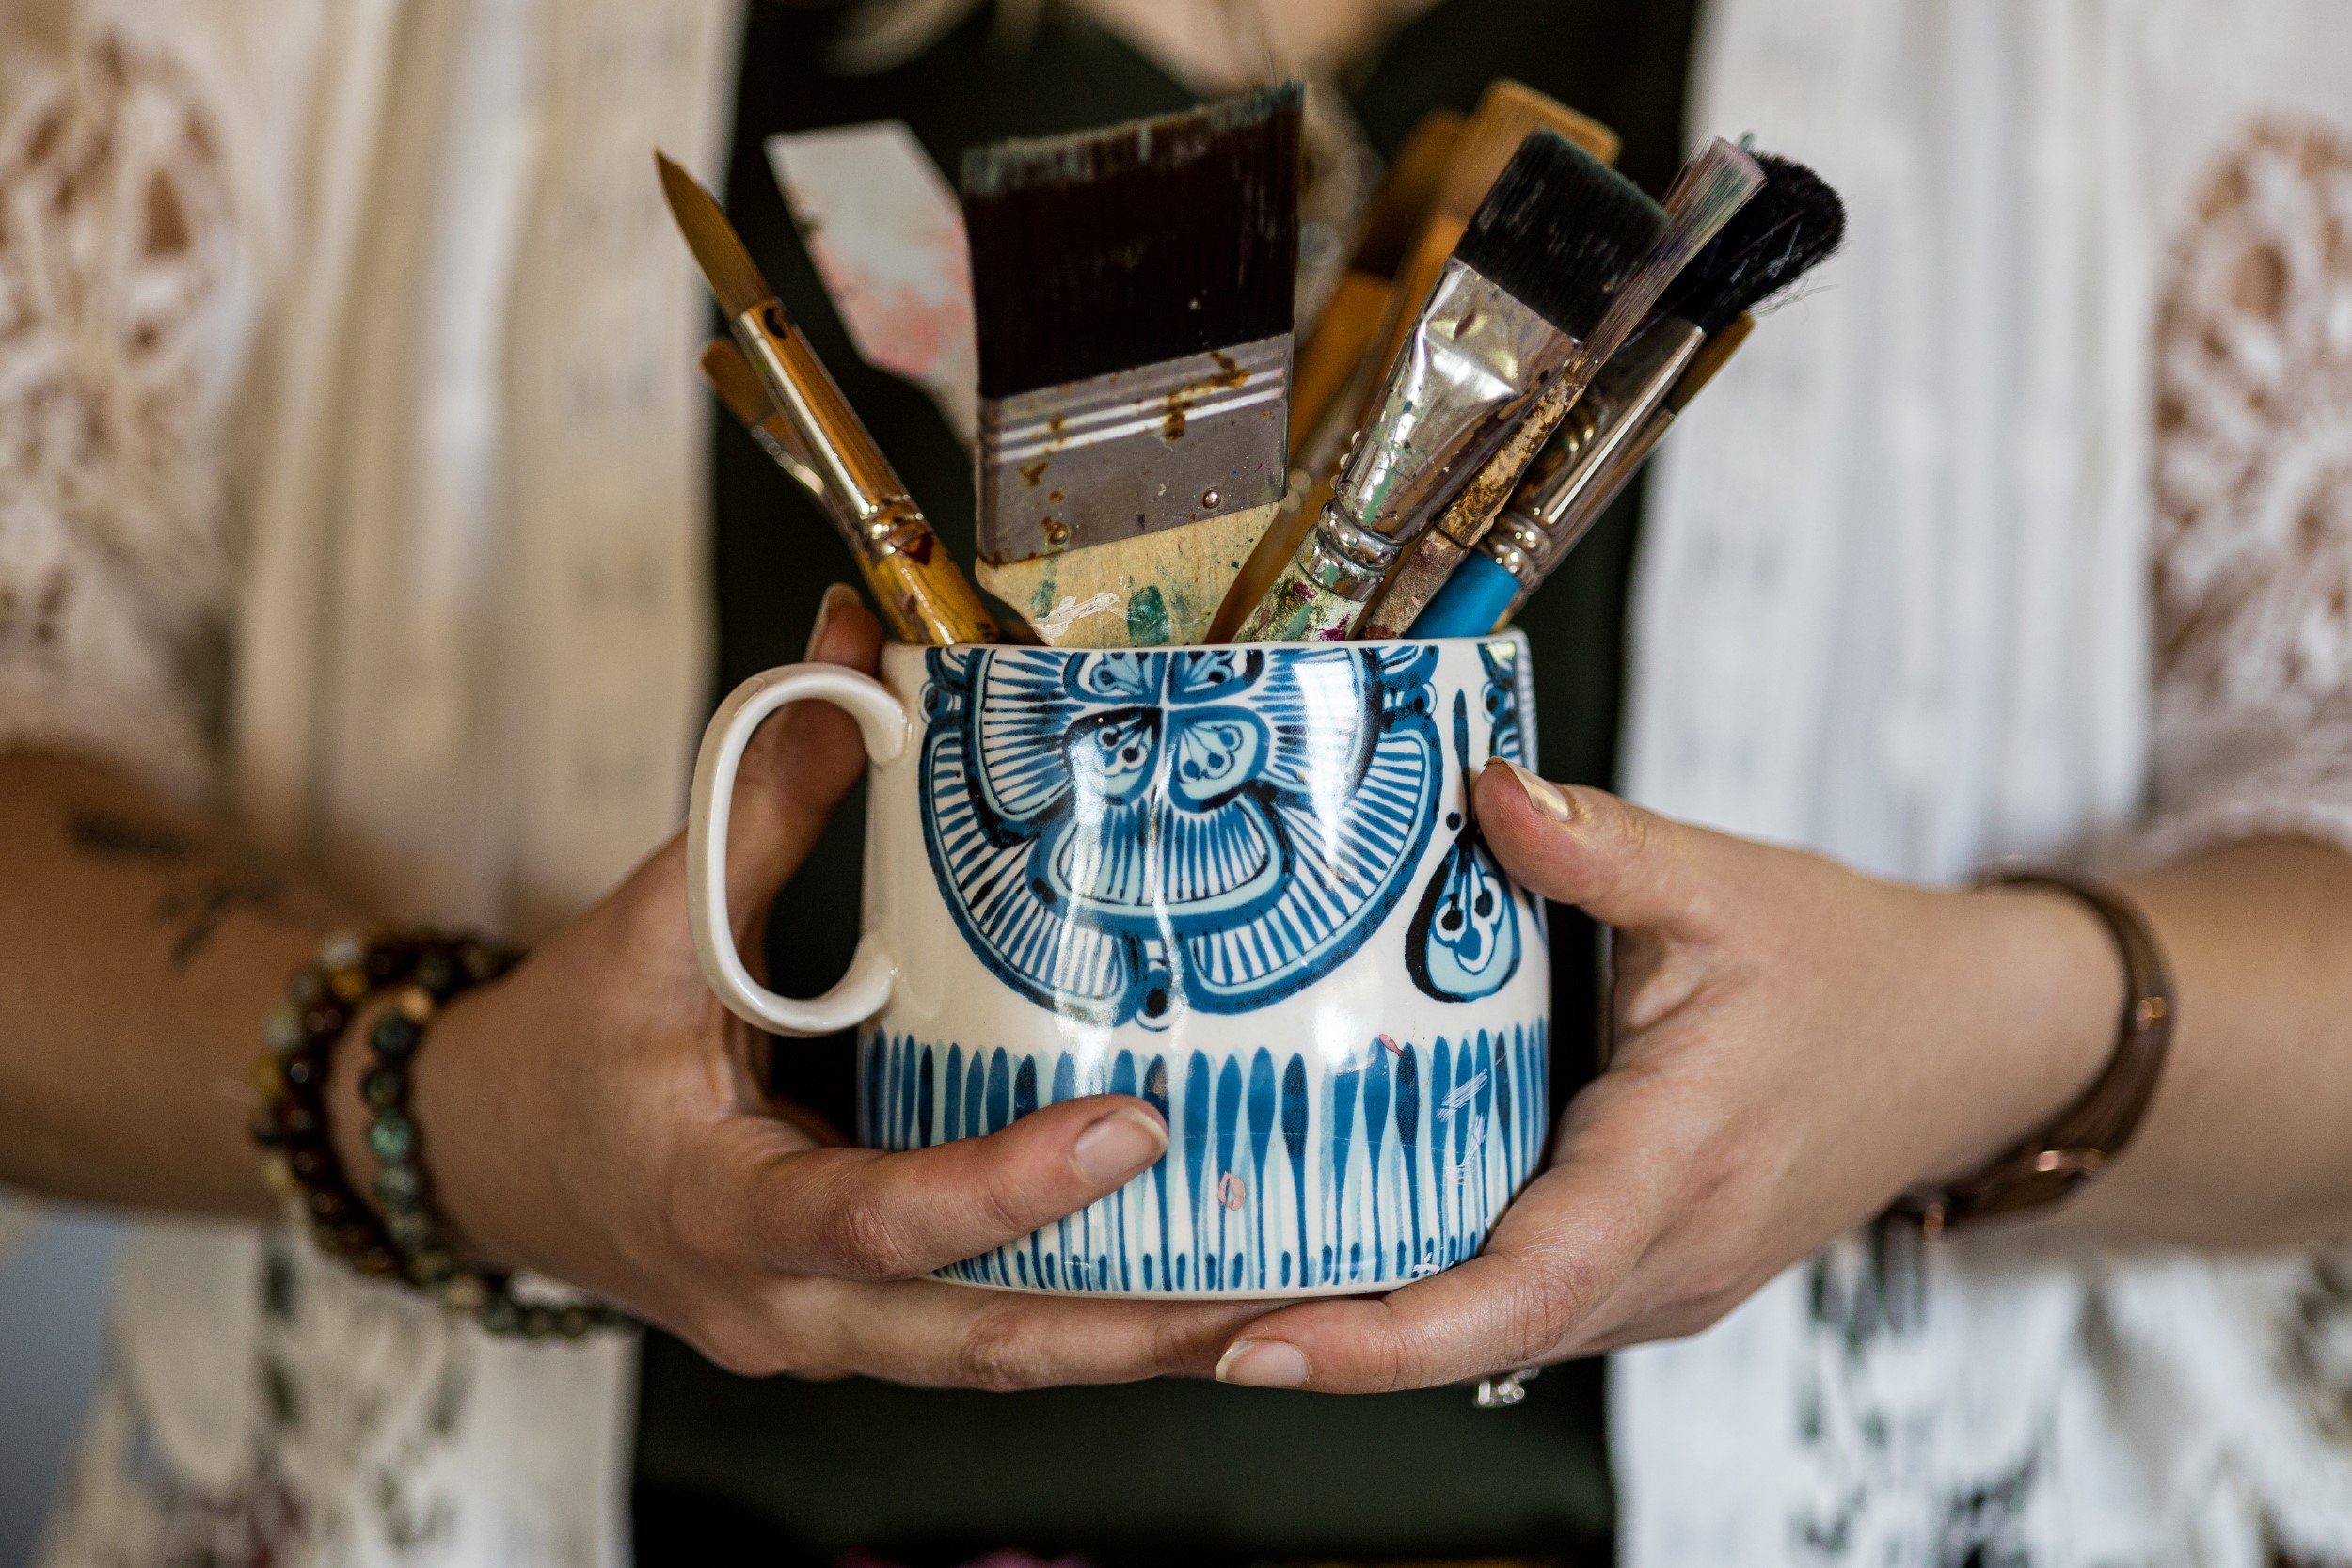  A mug containing various mixed media paint brushes. The mug is being held by two hands. 